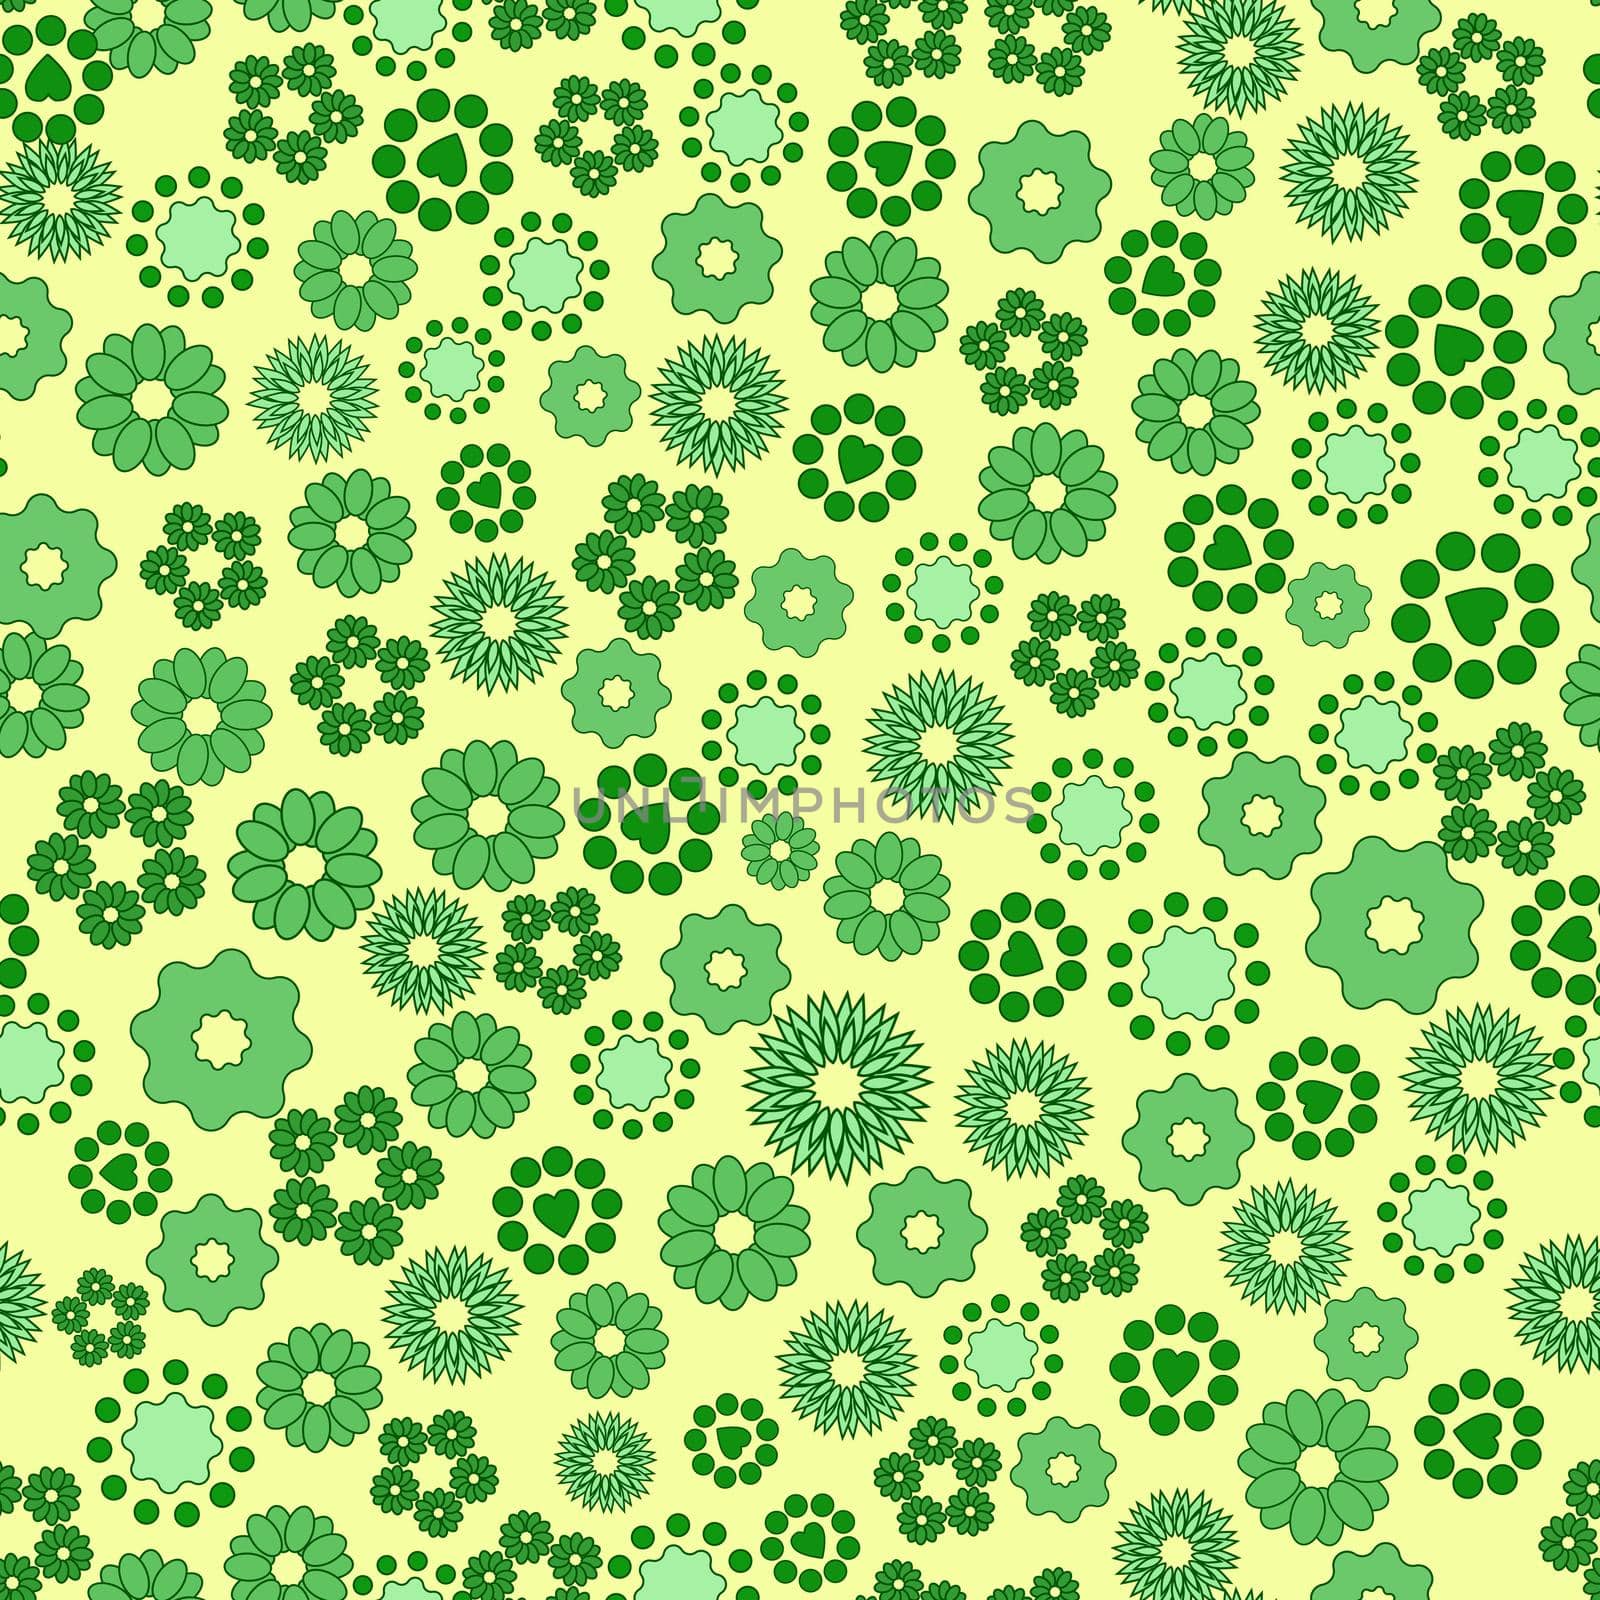 Seamless texture of green flowers and geometric elements by biruzza